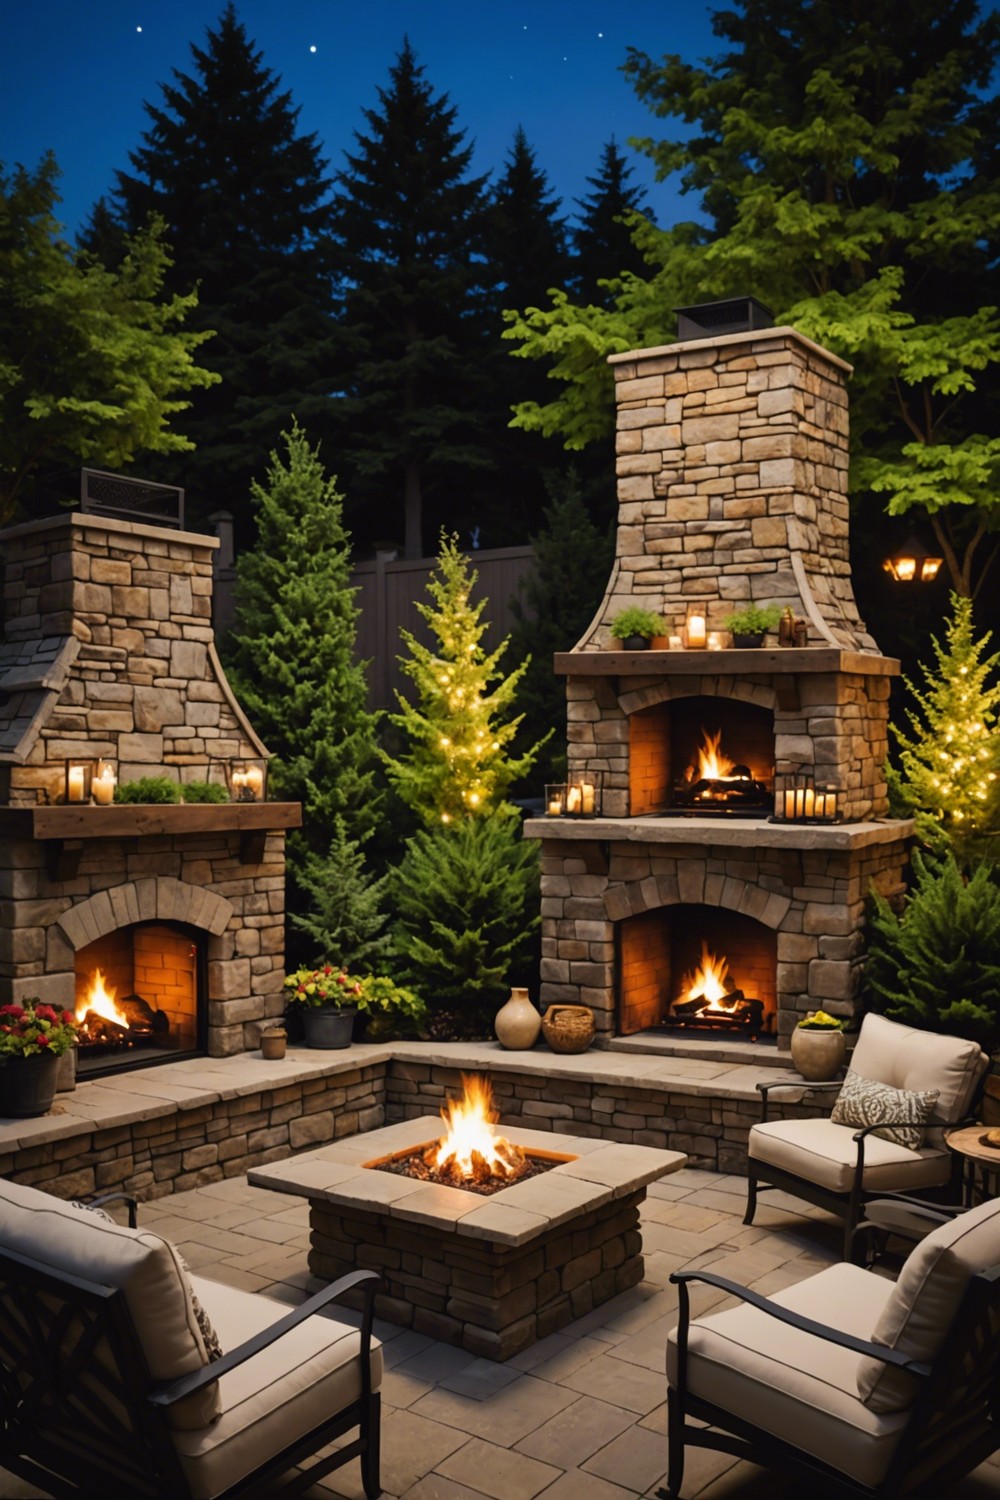 Outdoor Fireplace with Stacked Stone Walls